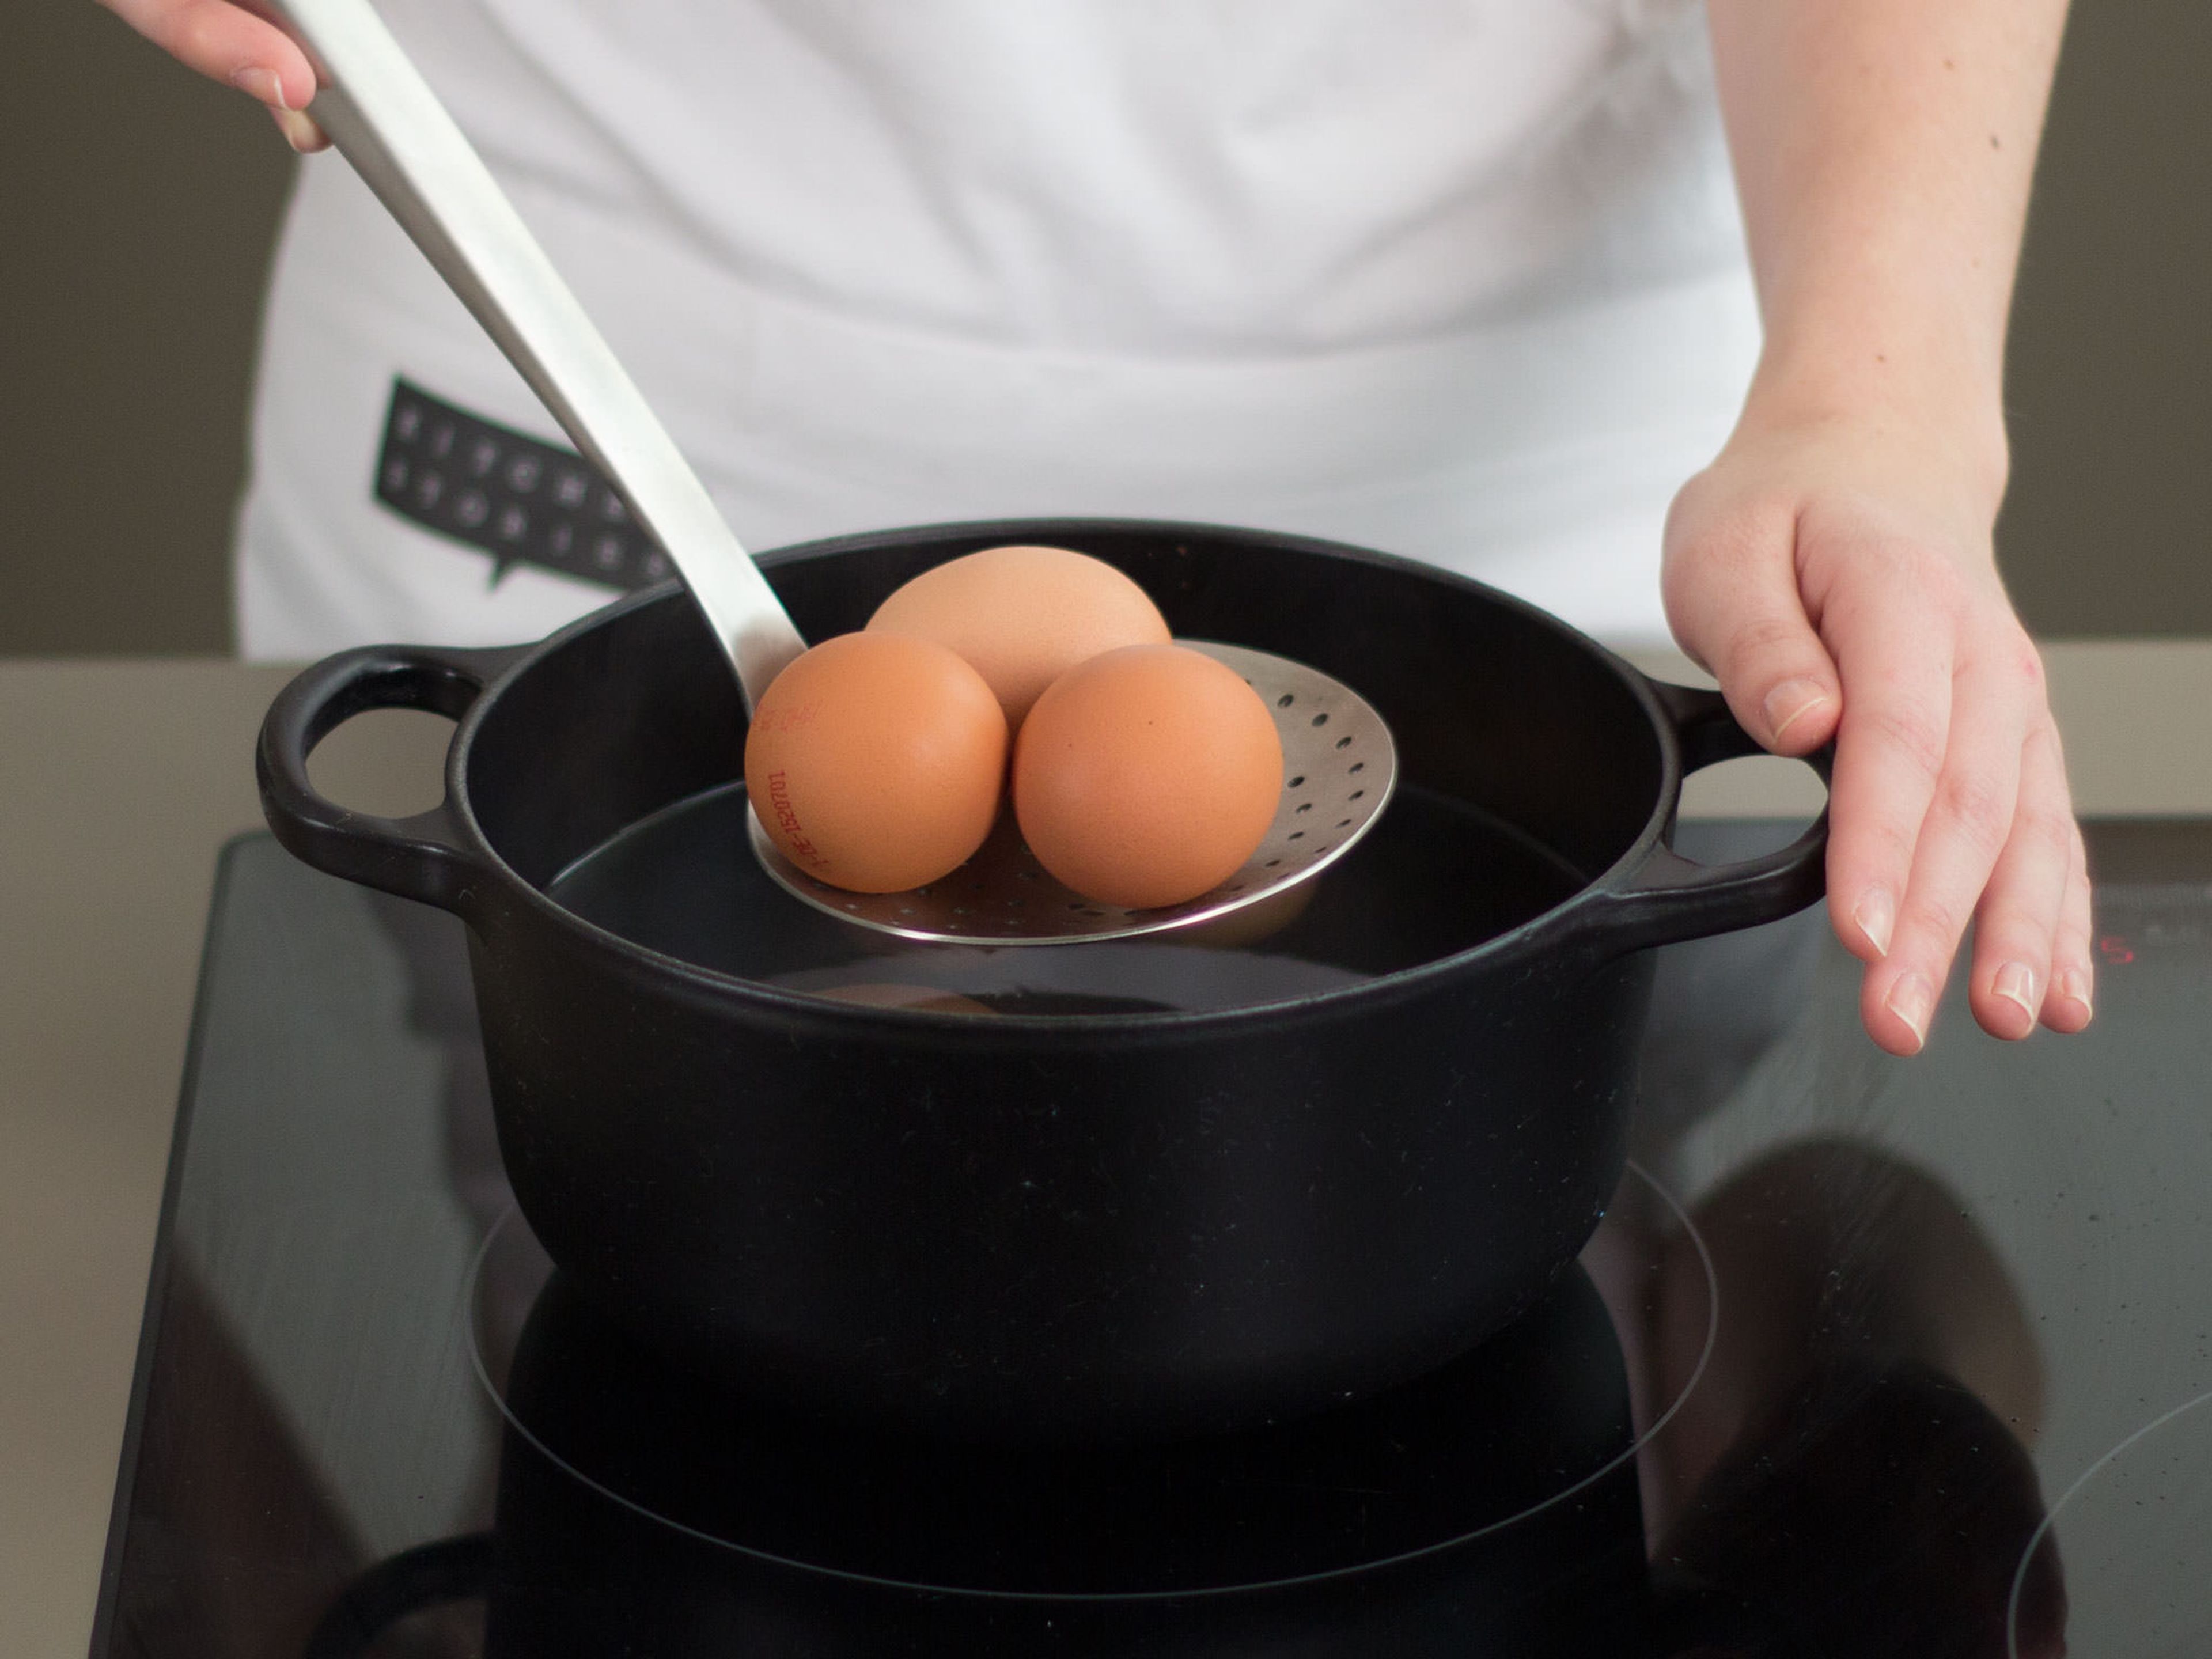 Place eggs in boiling water and cook for approx. 8 - 9 min.